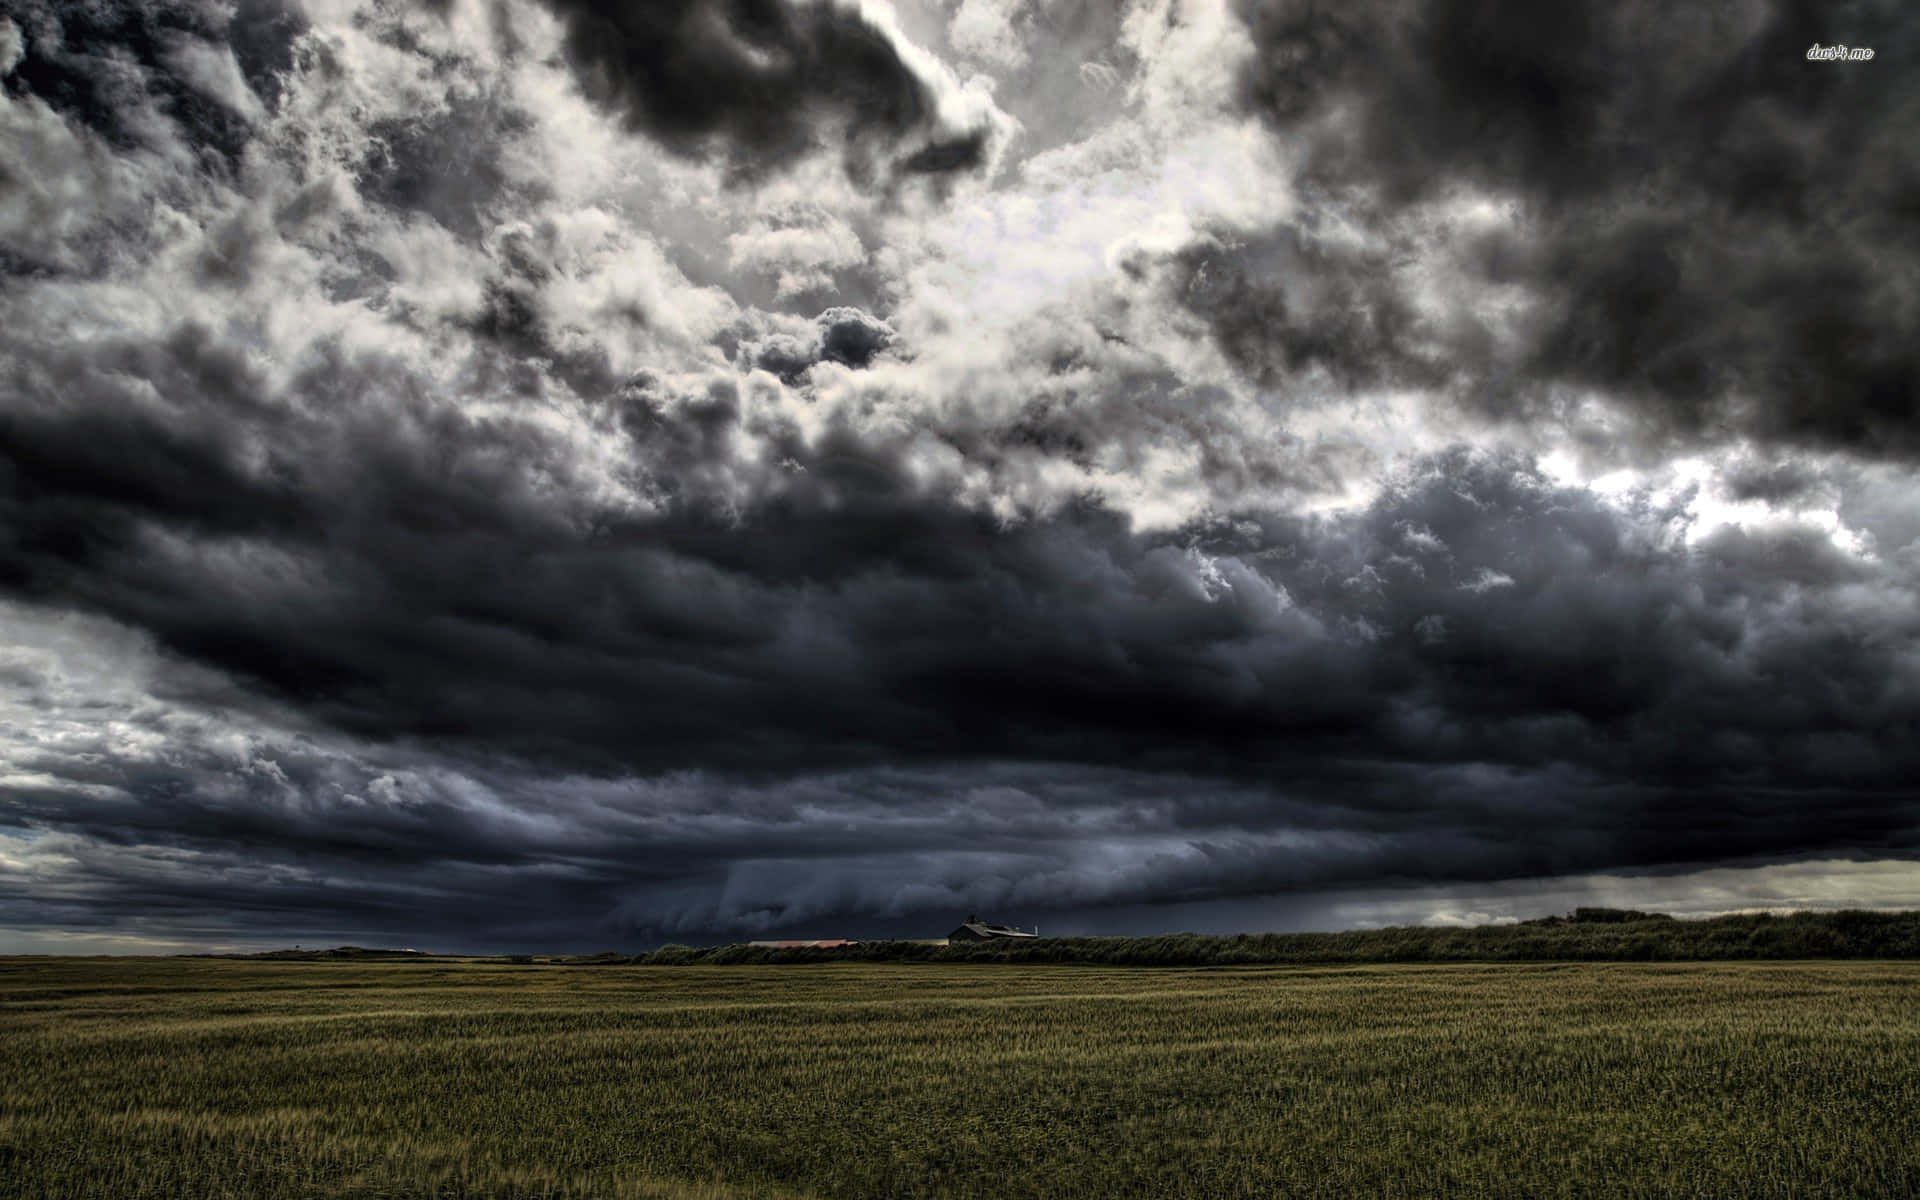 Experience the power of nature with a stormy sky